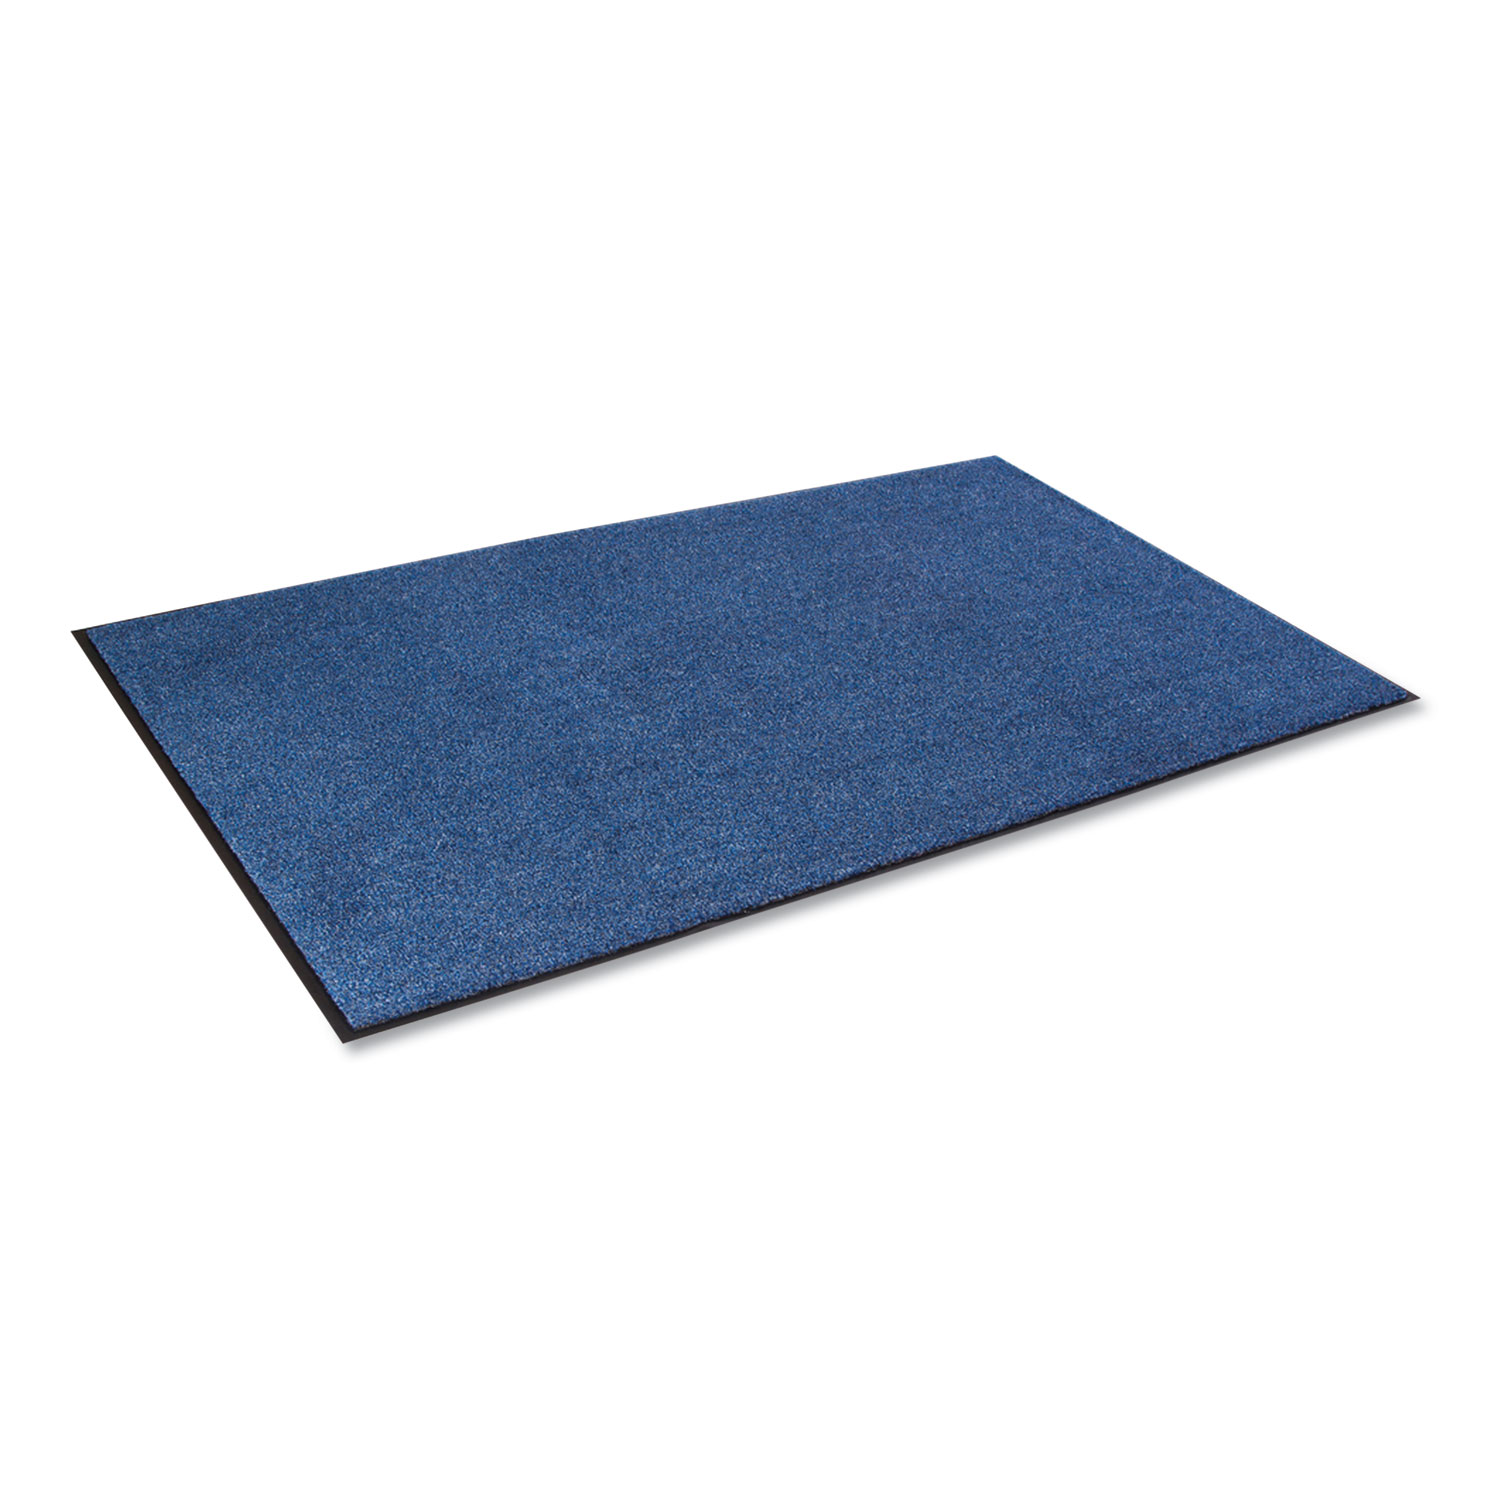  Crown GS 0035MB Rely-On Olefin Indoor Wiper Mat, 36 x 60, Marlin Blue (CWNGS0035MB) 